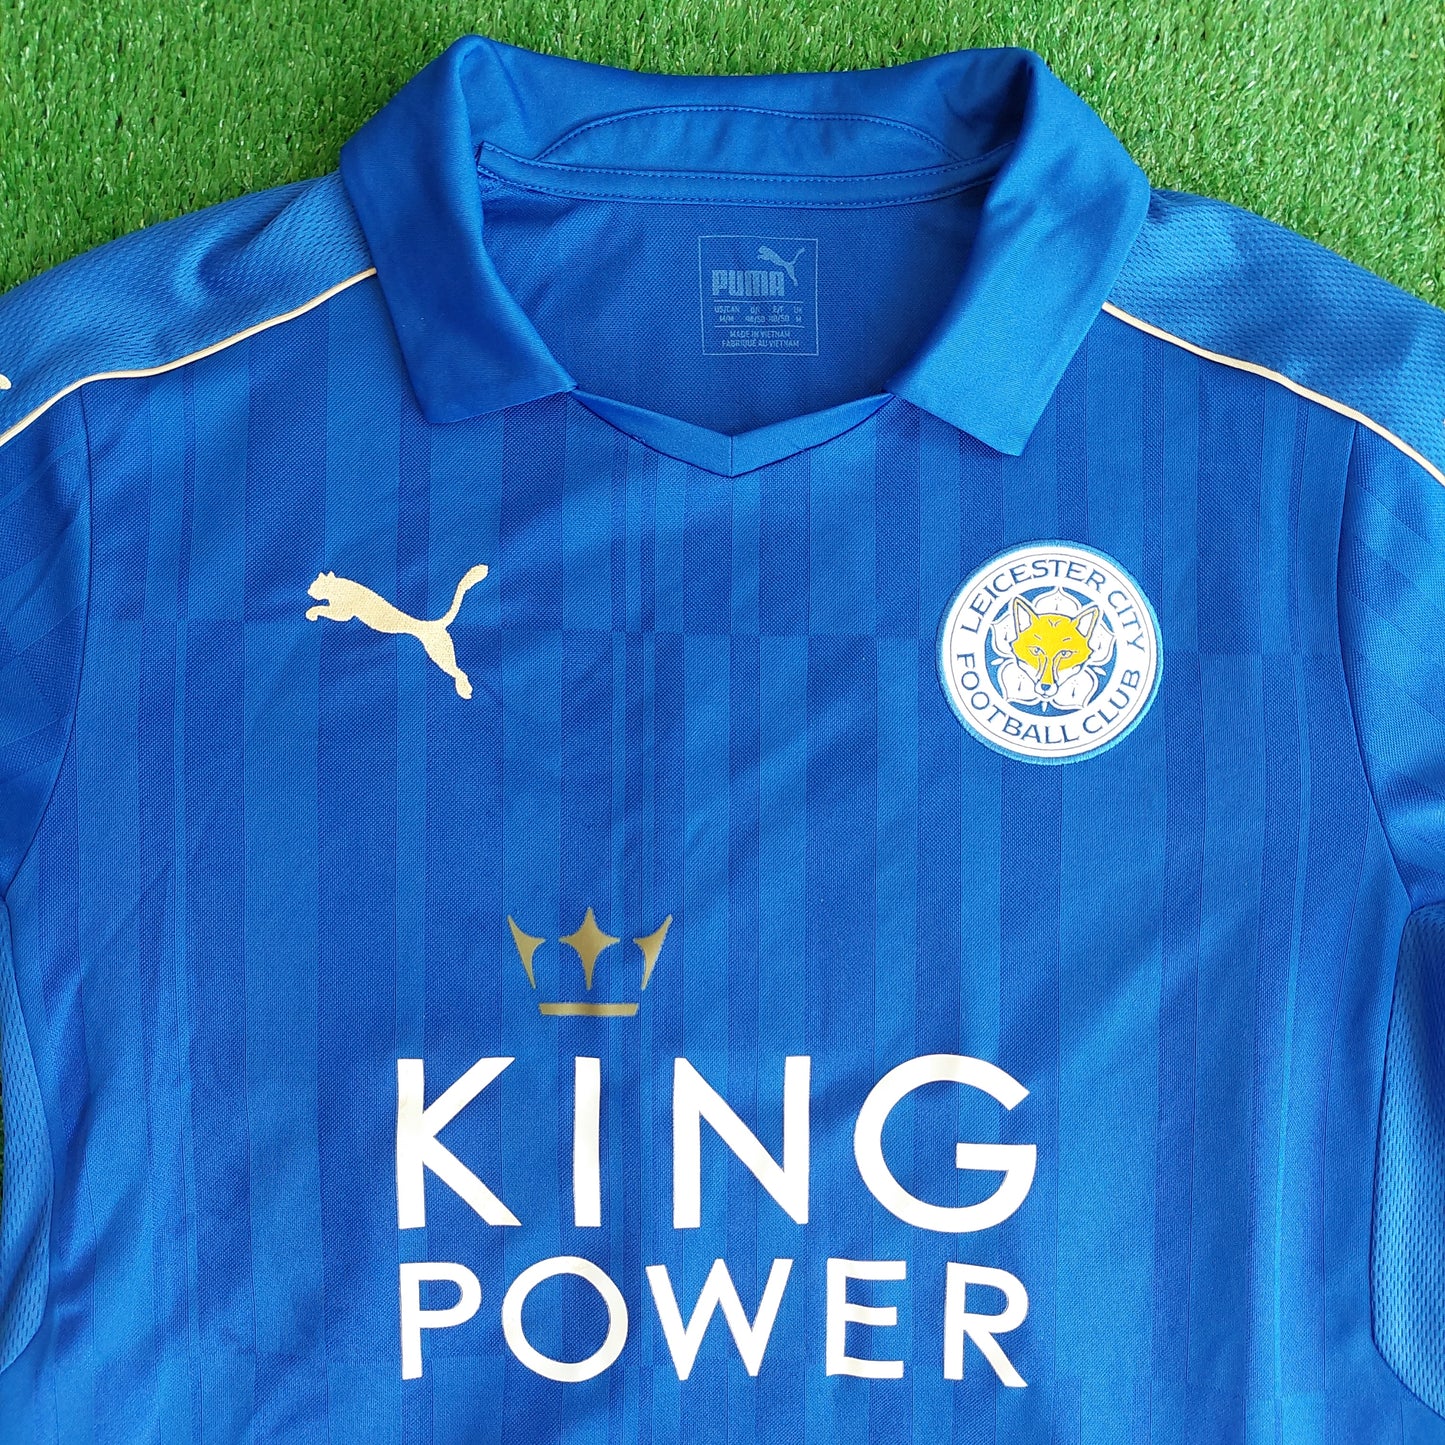 Leicester City 2016/17 Home Shirt (Very Good) - Size M